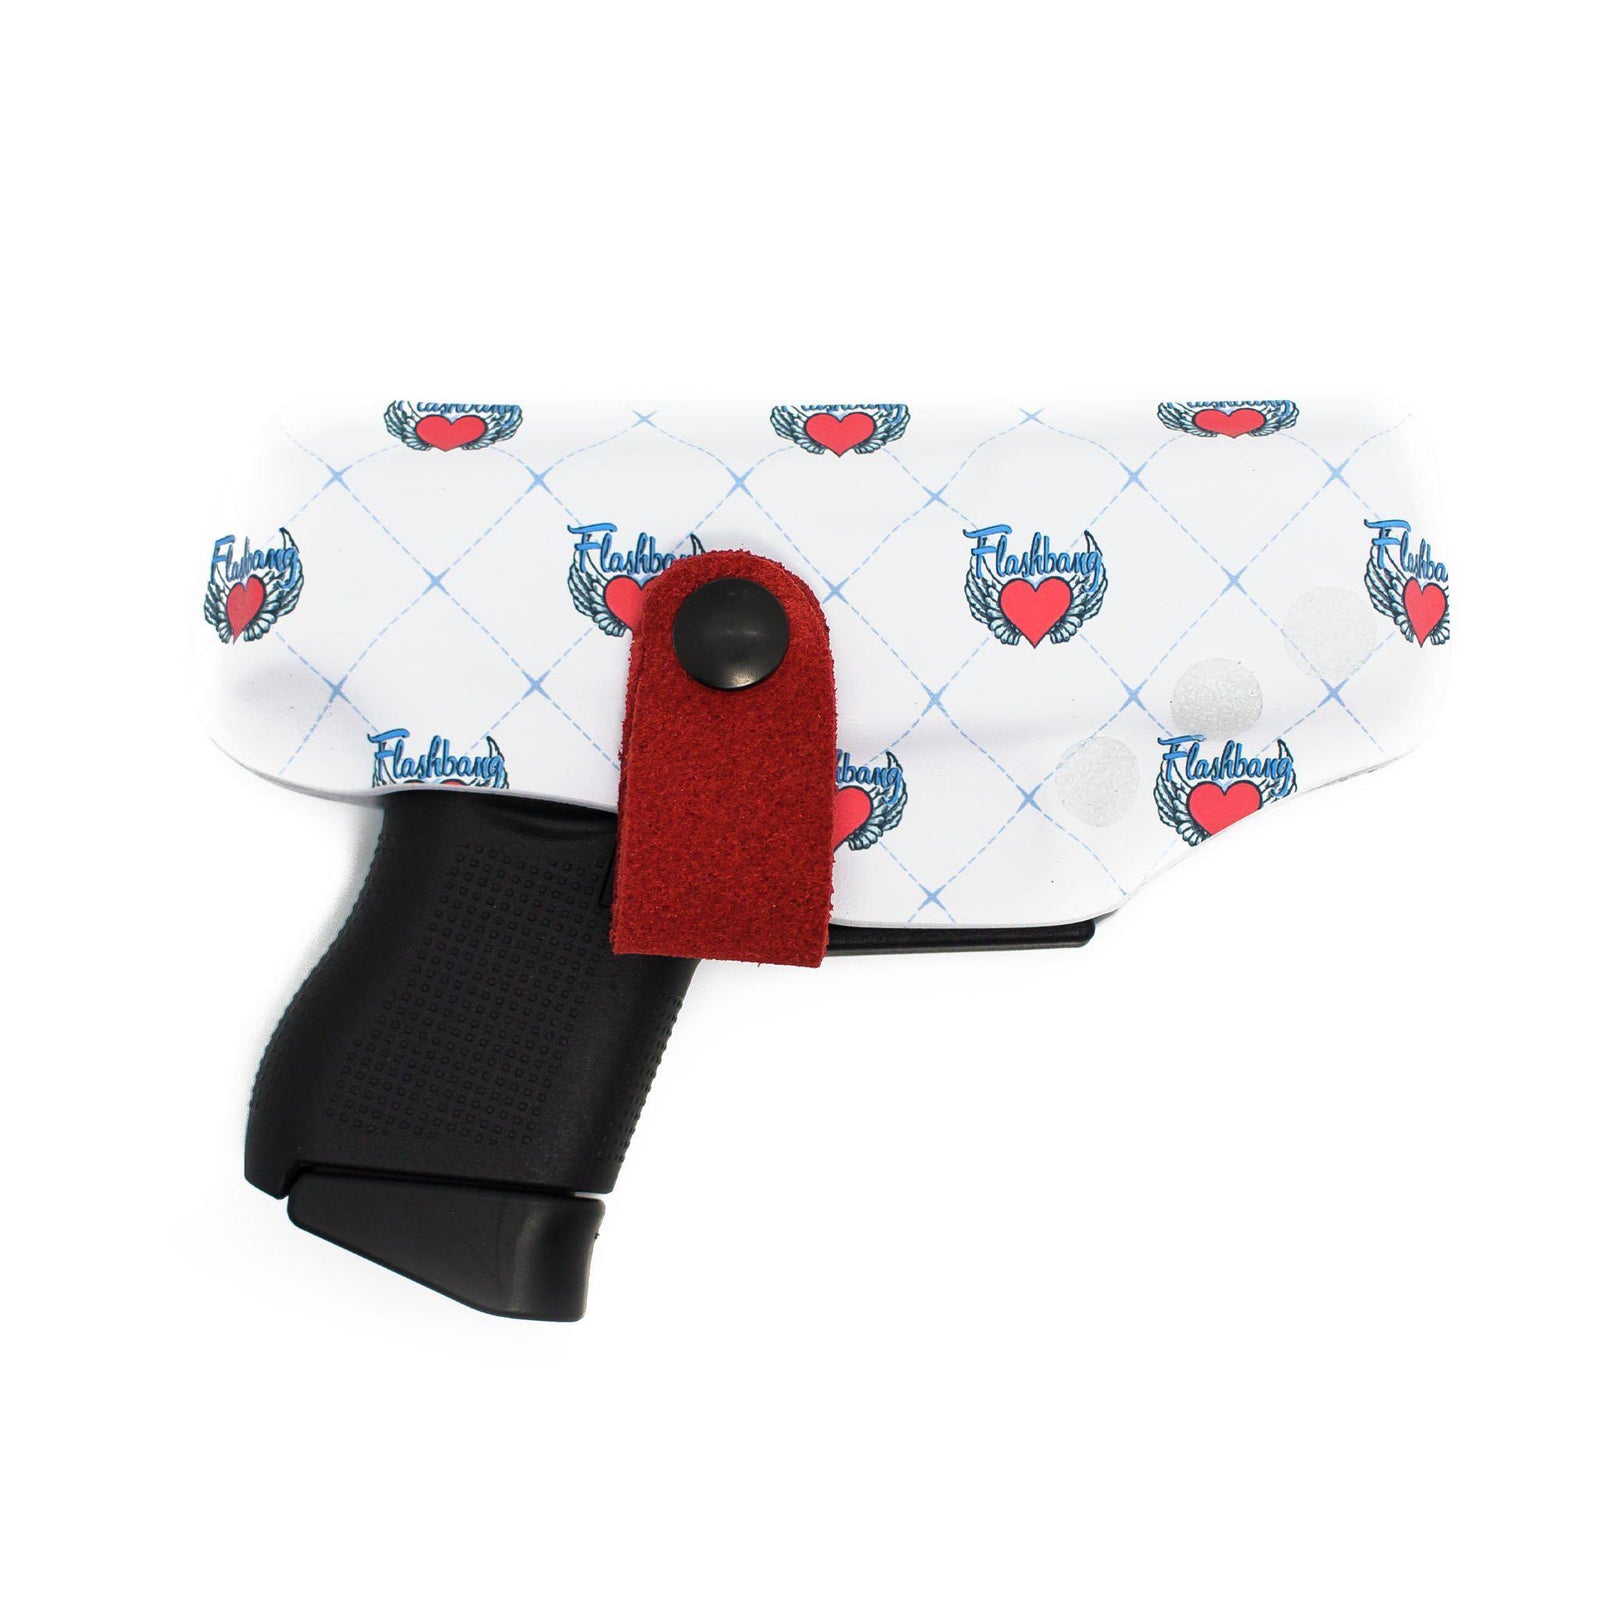 Flashbang Bra Holster - Did you know that we offer an XL strap to  accommodate wider gore (center part of your bra) bras?! ❤️- Holster: Flashbang  bra holster Teddy edition ❤️- Gun